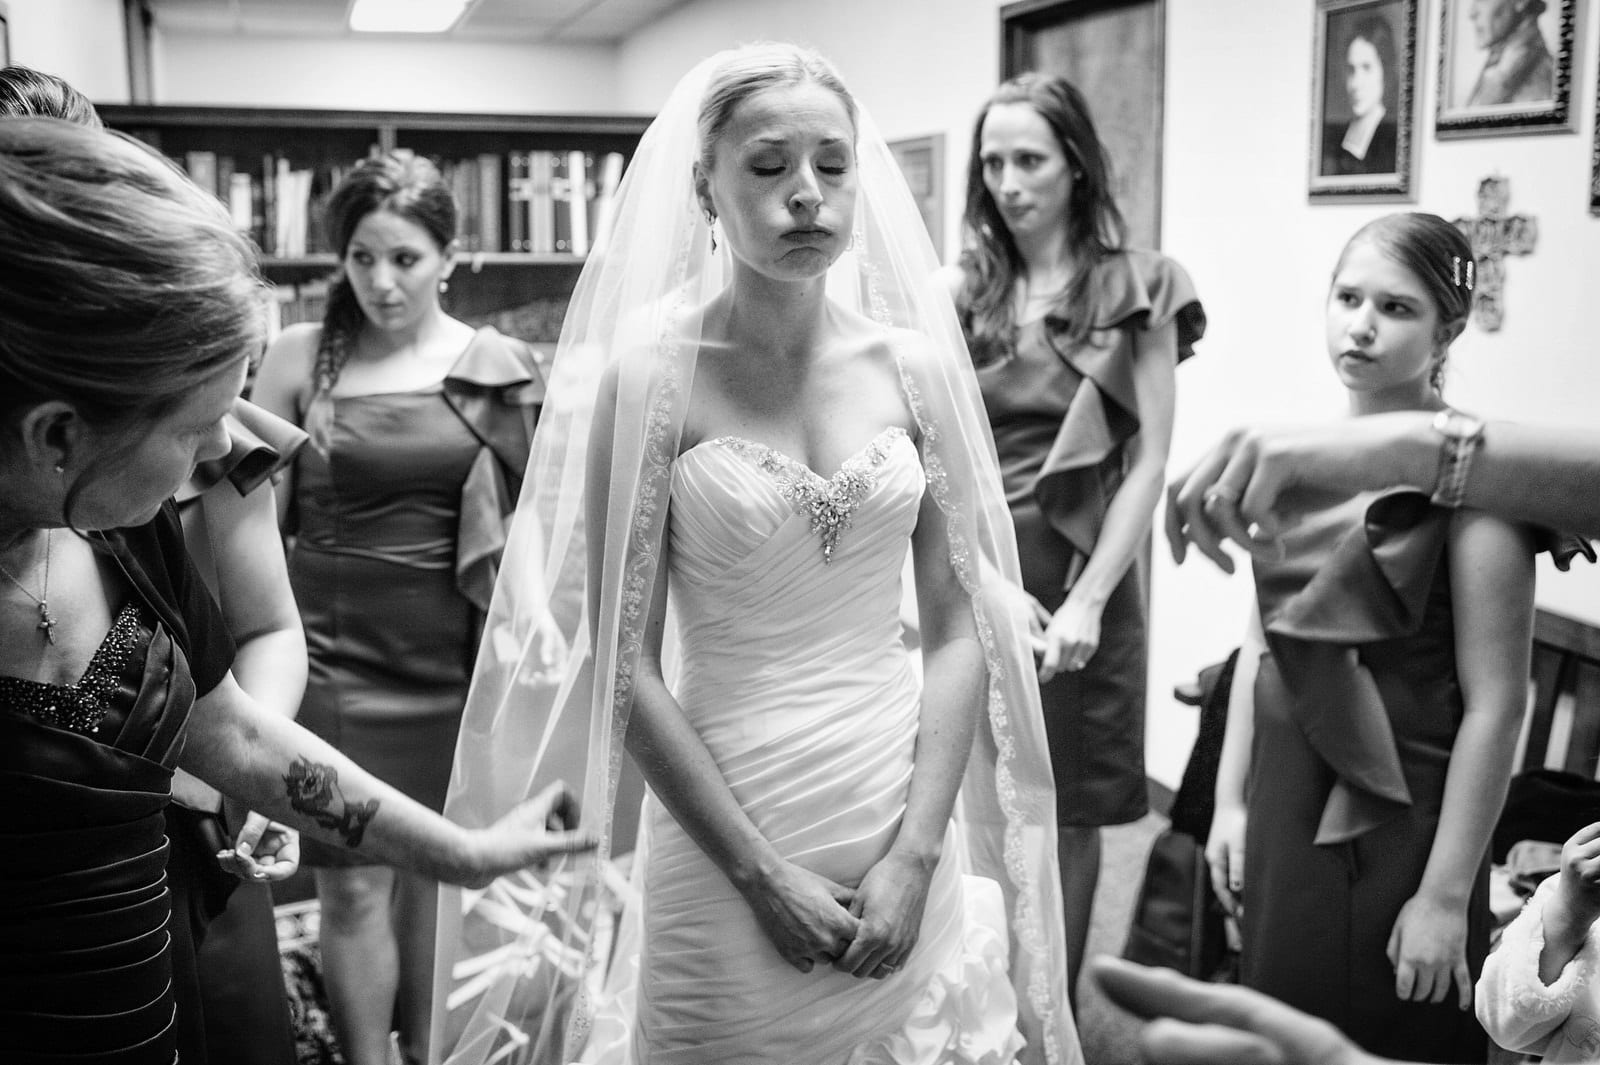 A bride closes her eyes and puffs out a breath as worried looking women stand around her before her wedding at Duquesne University Chapel.